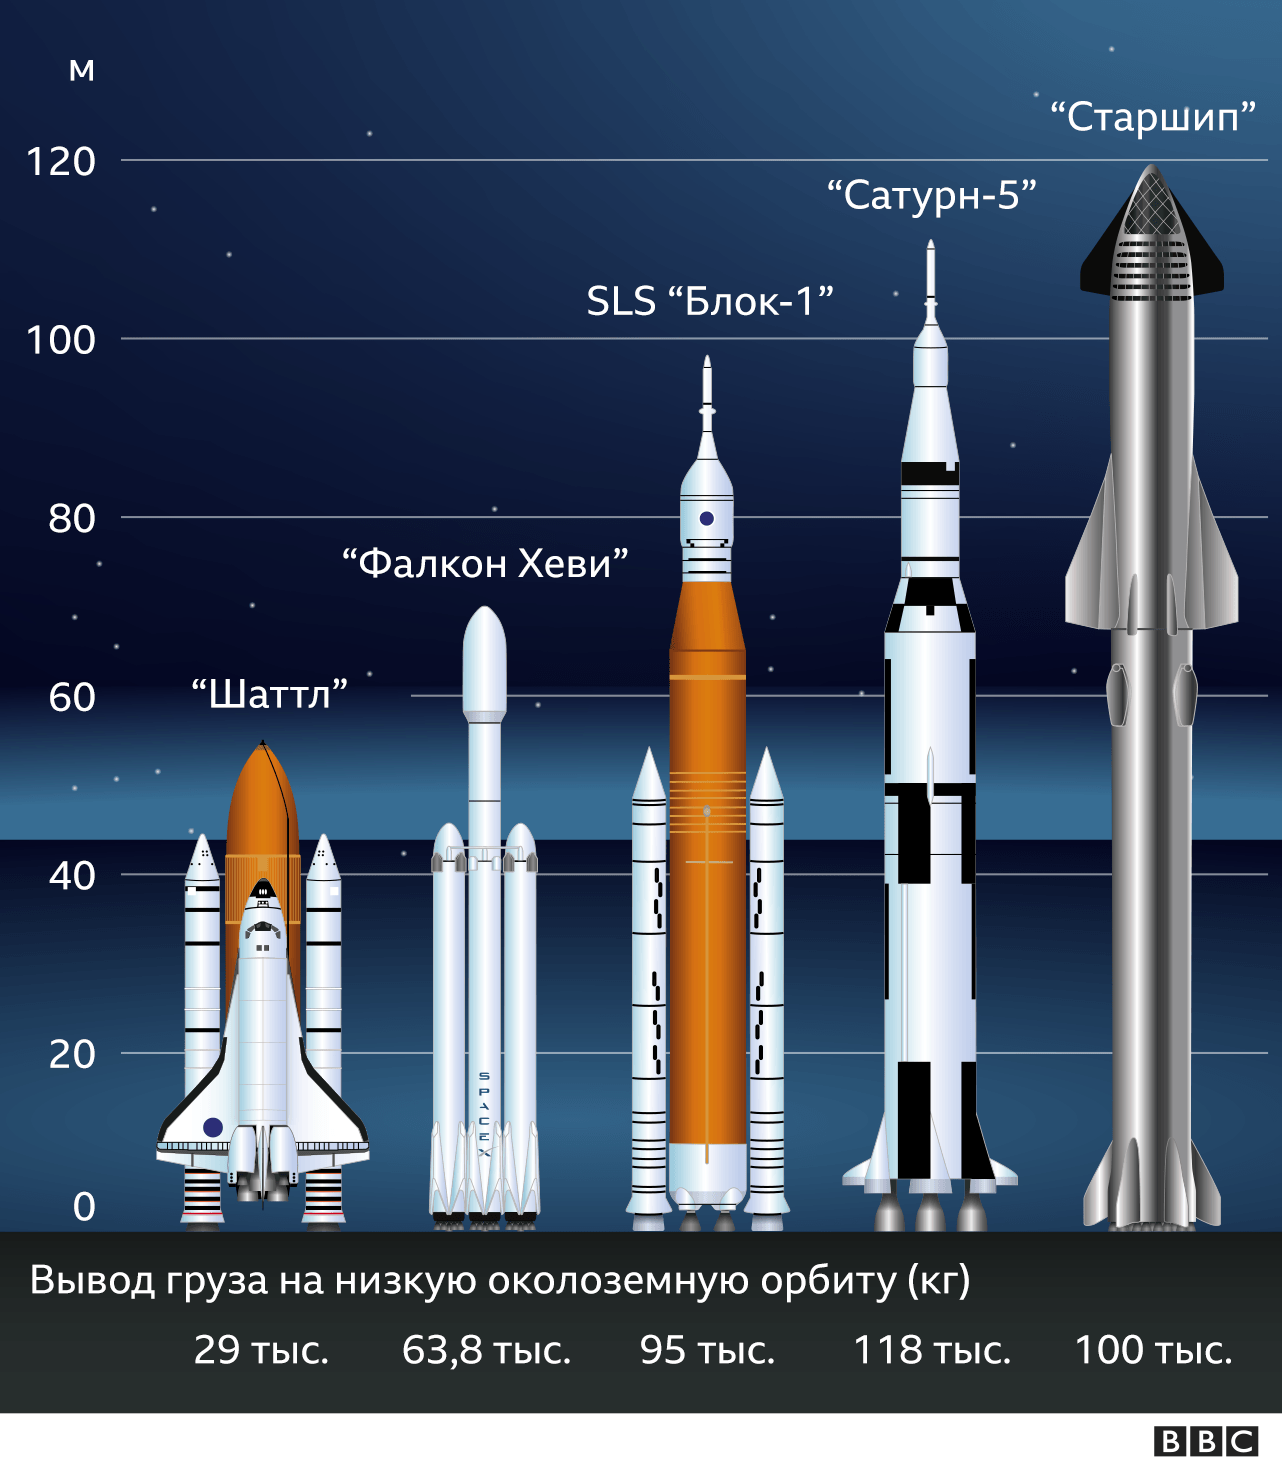 https://ichef.bbci.co.uk/news/800/cpsprodpb/FB38/production/_116421346_comparison_of_rockets_russian_640-nc-2x-nc.png